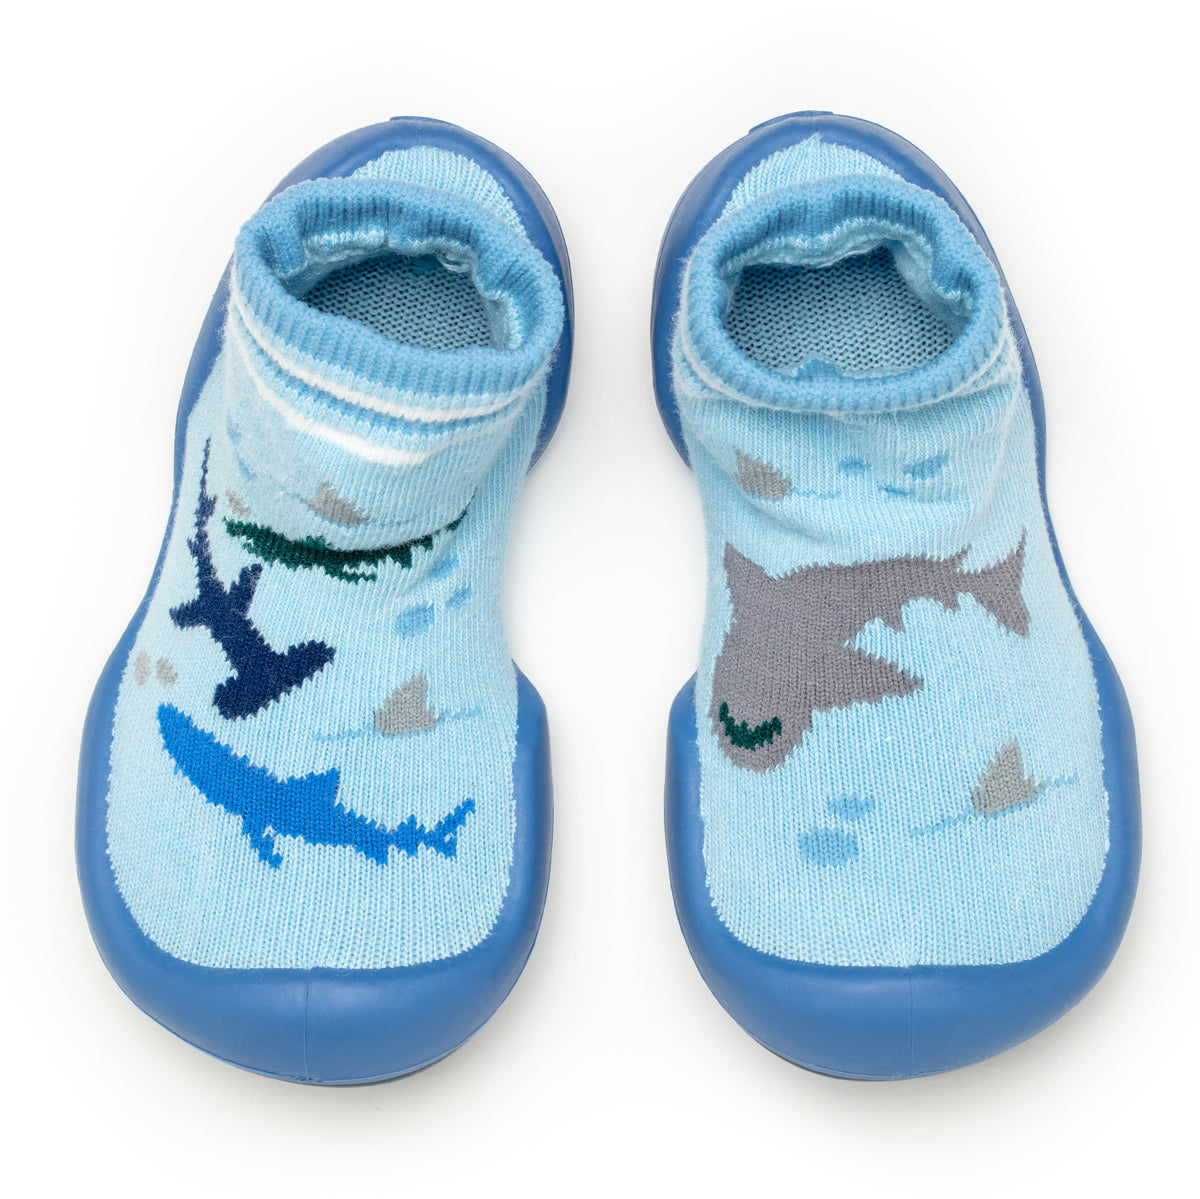 Exclusive Baby Unisex Shoes